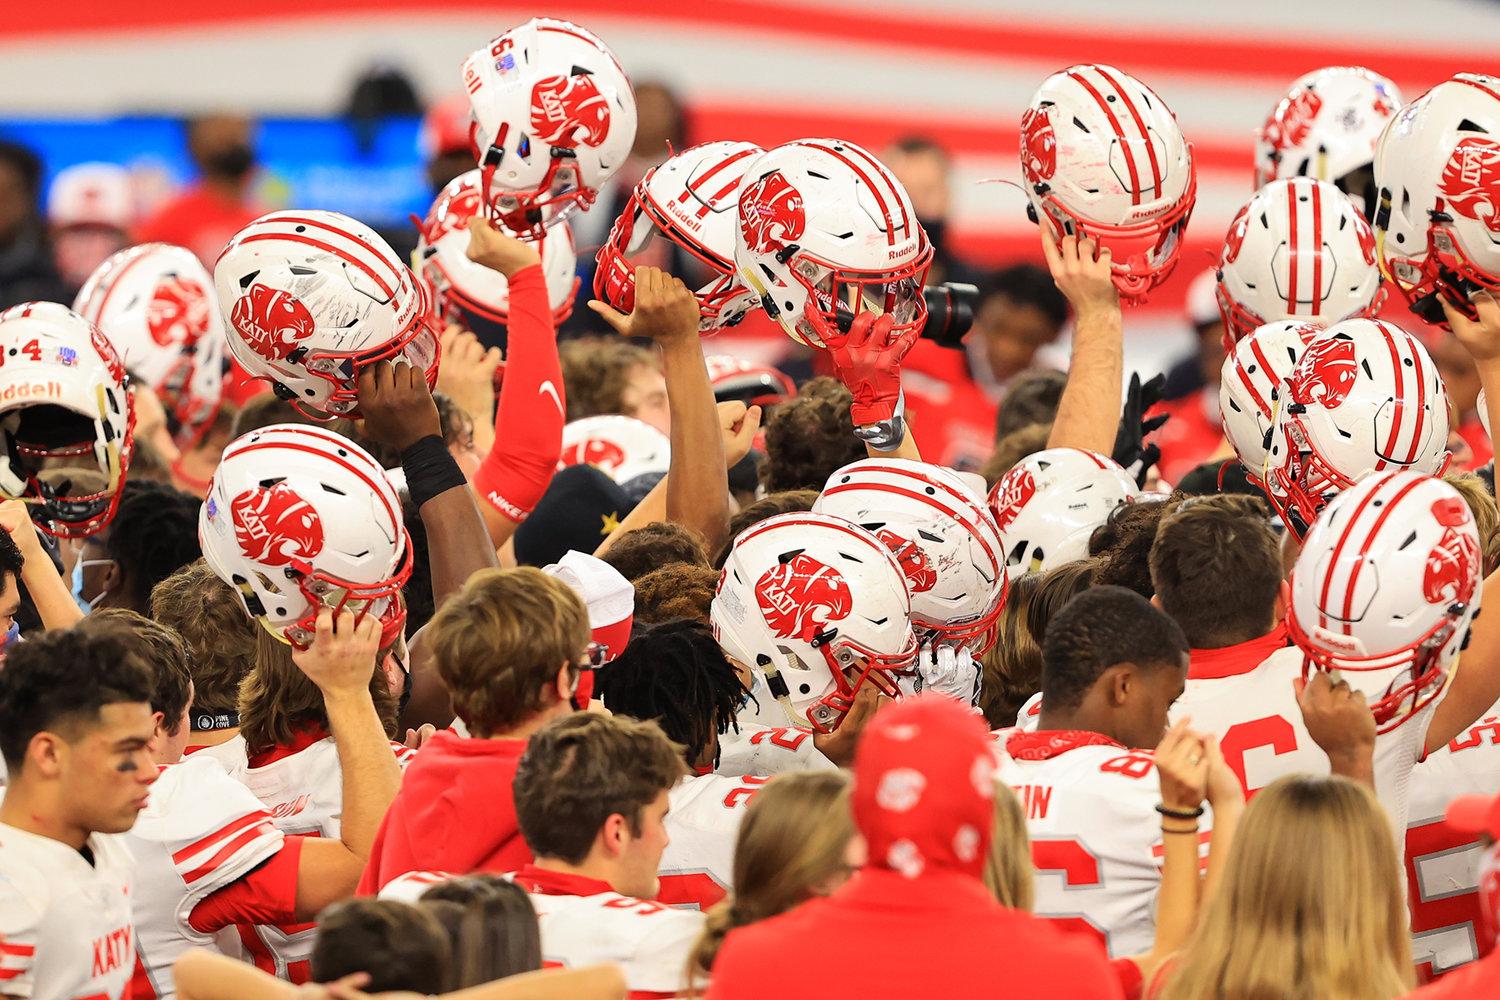 Katy players celebrate their 51-14 win over Cedar Hill at AT&T Stadium on Saturday afternoon. Katy won the Class 6A-Division II state championship.